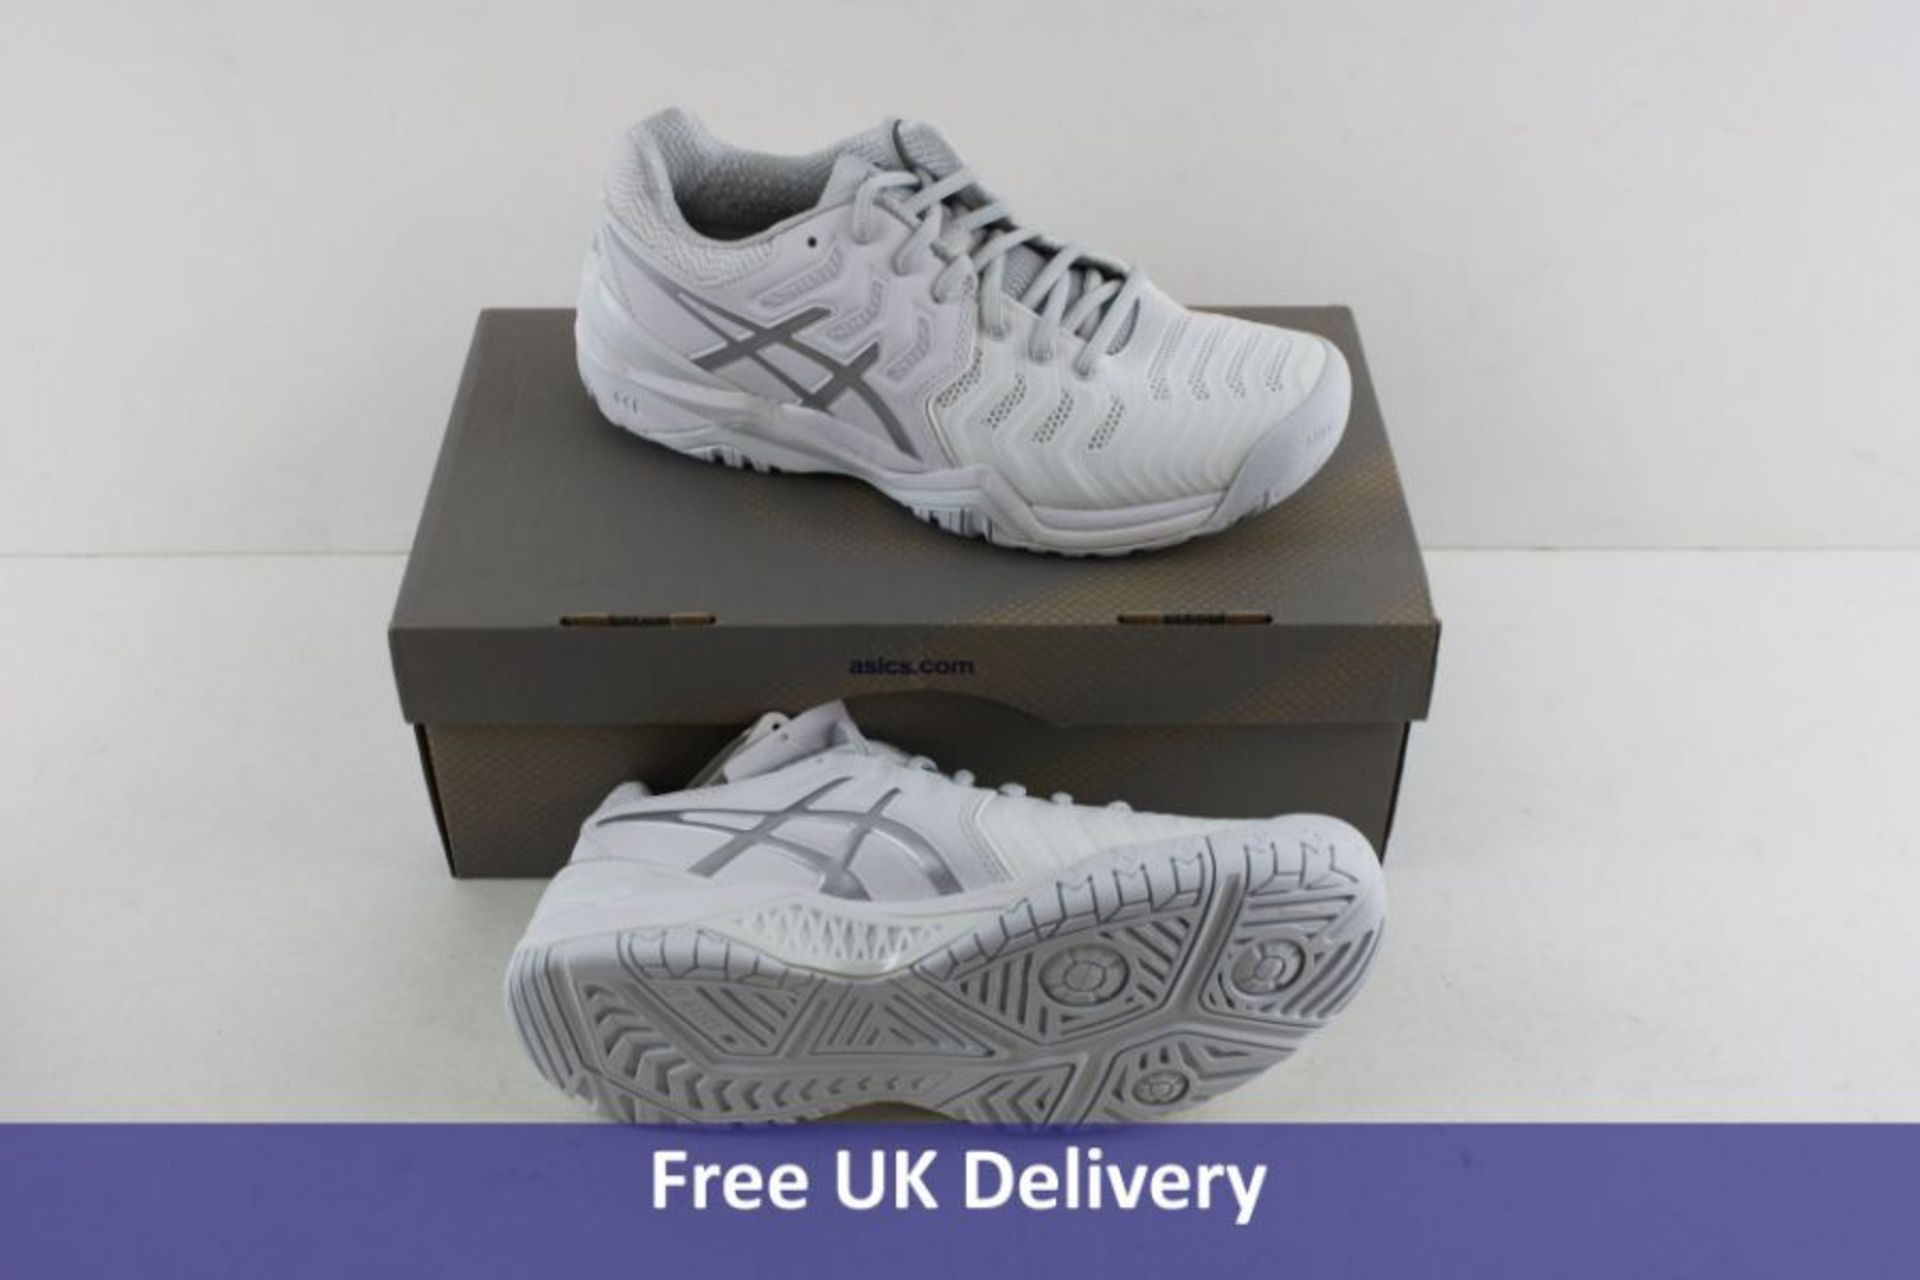 Asics Women's Gel Resolution 7 Trainers, White and Silver, UK 6